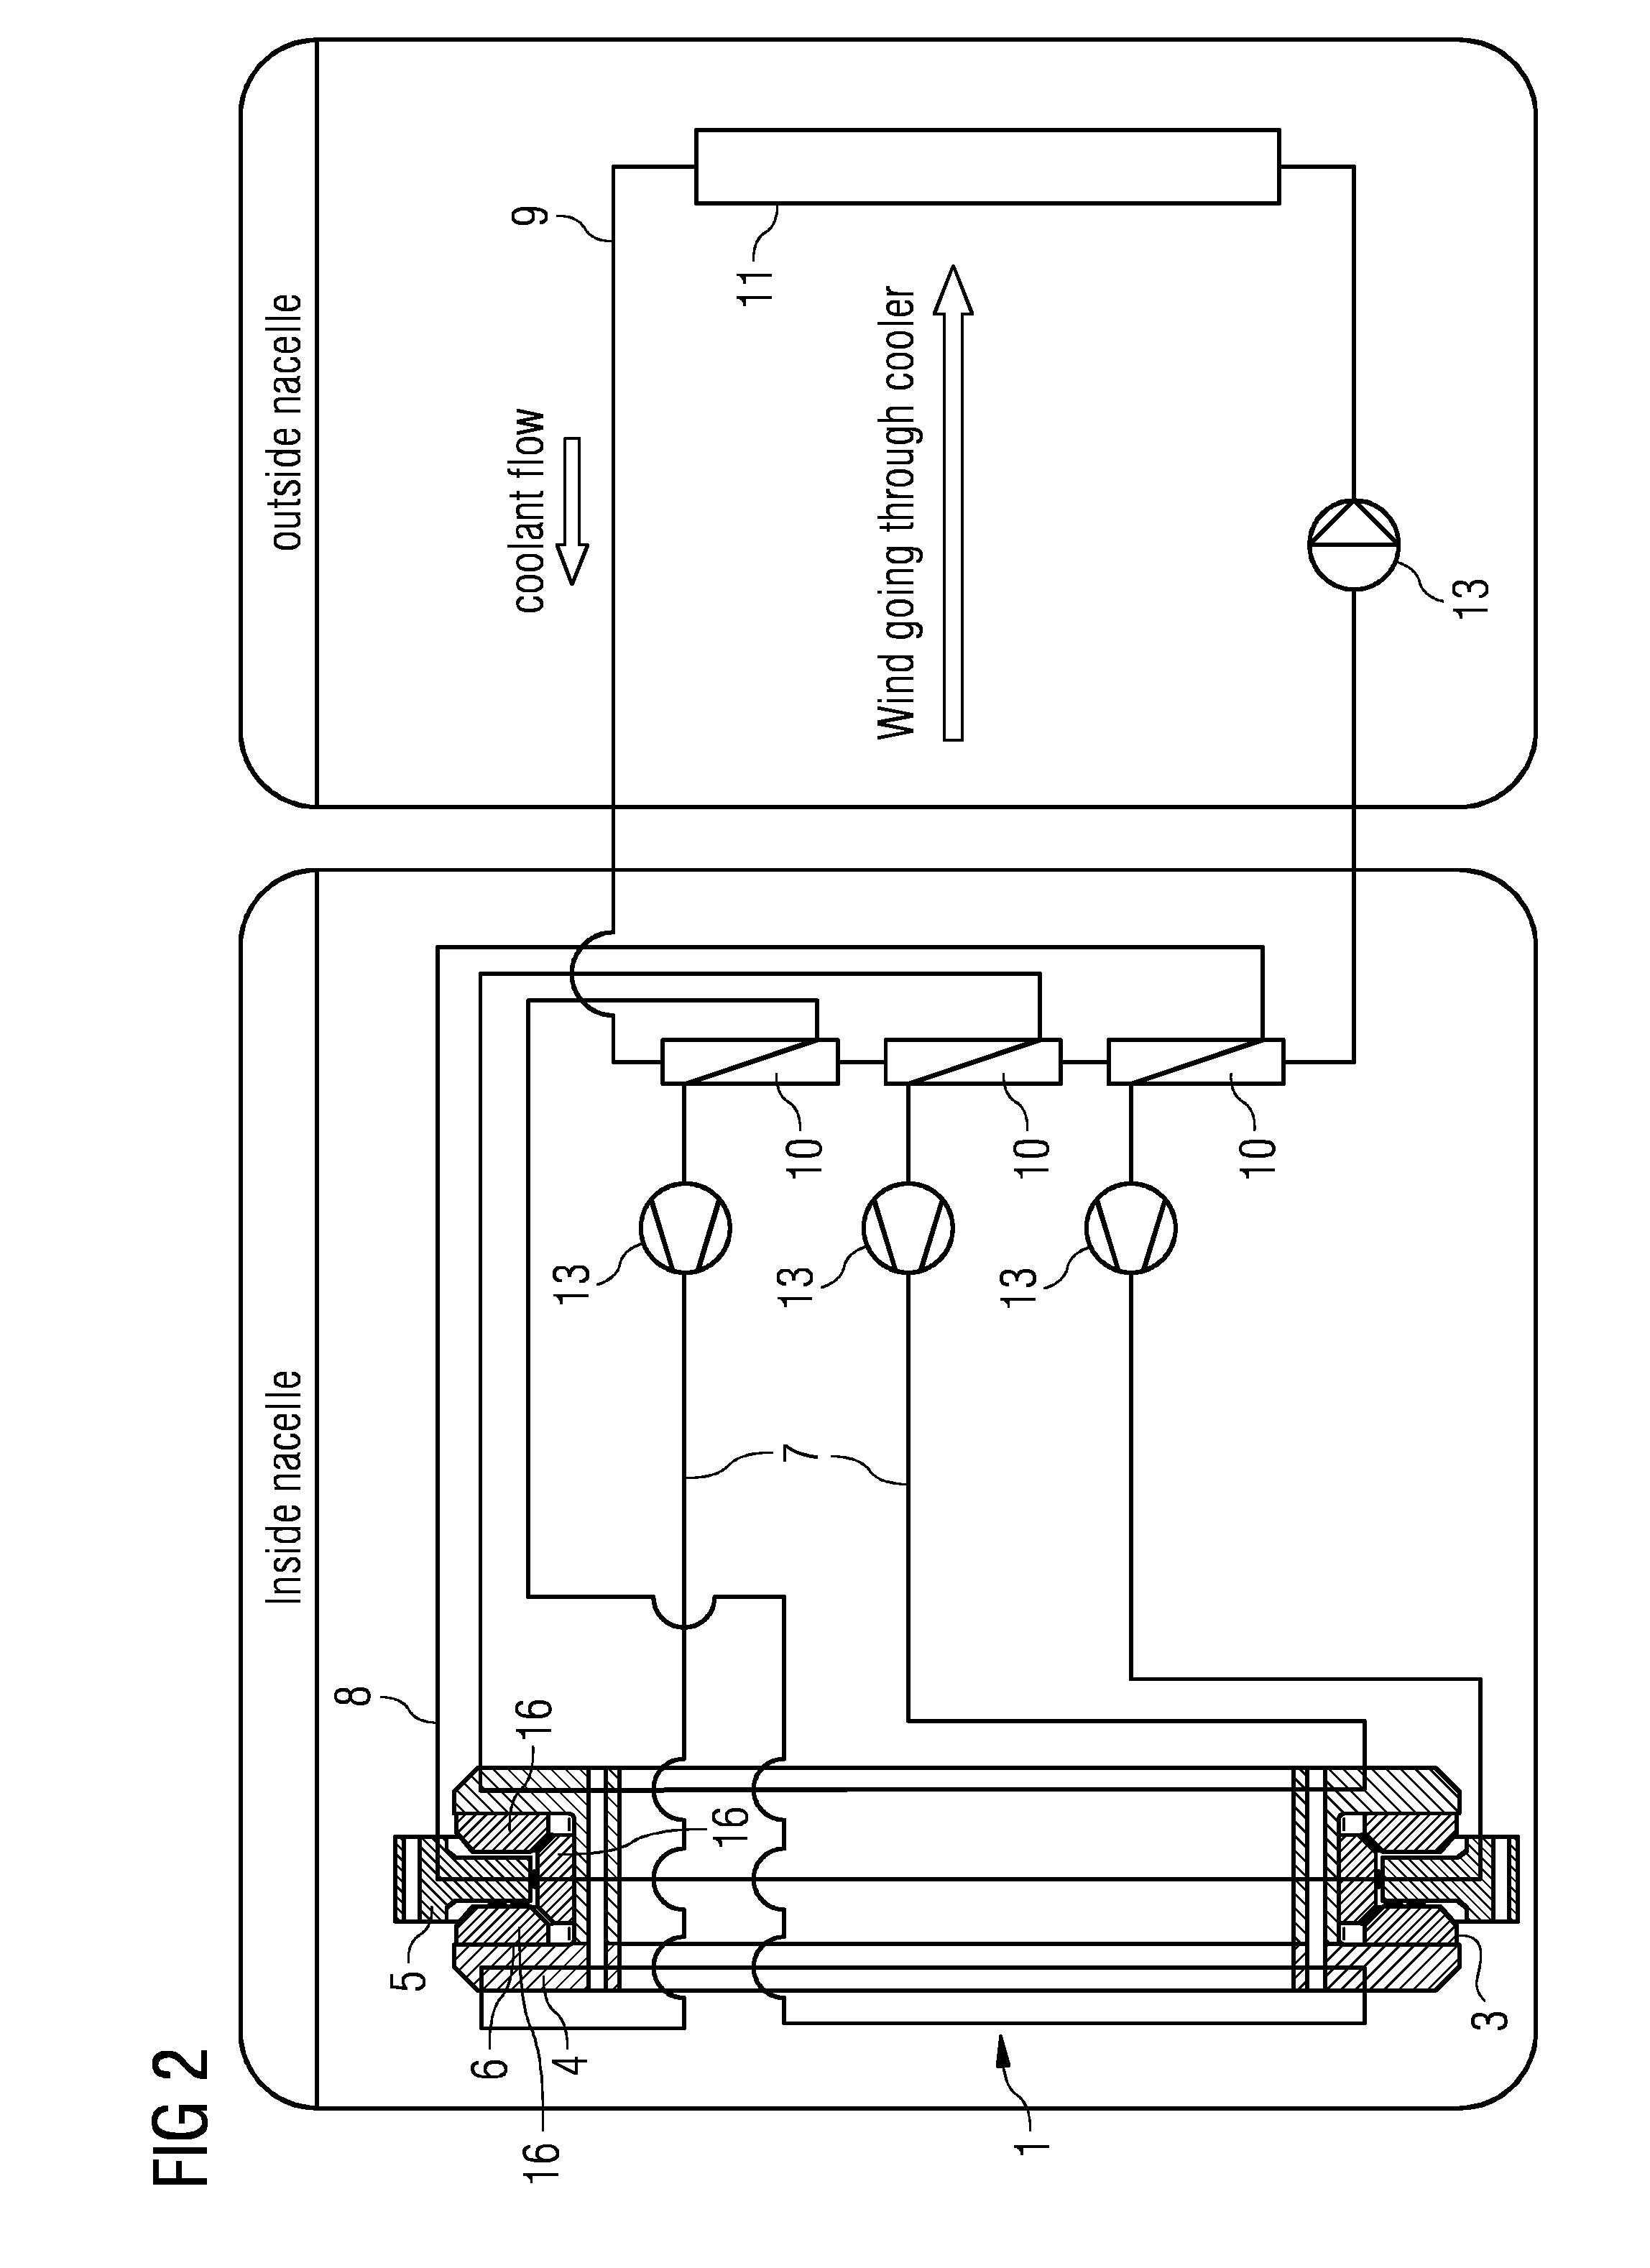 Arrangement to control the clearance of a sliding bearing